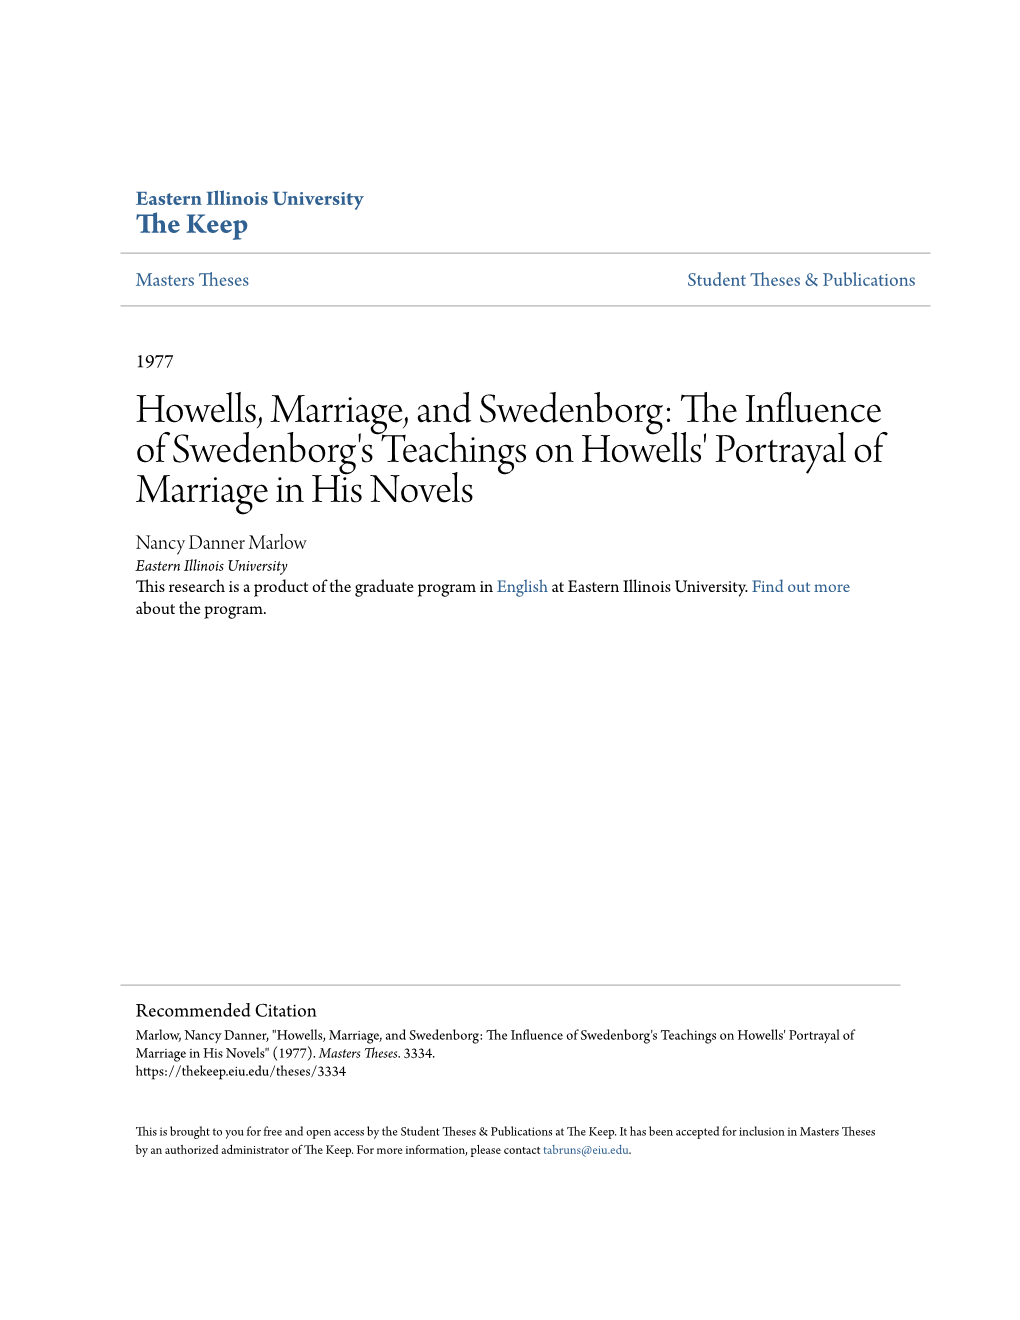 The Influence of Swedenborg's Teachings on Howells' Portrayal of Marriage in His Nove